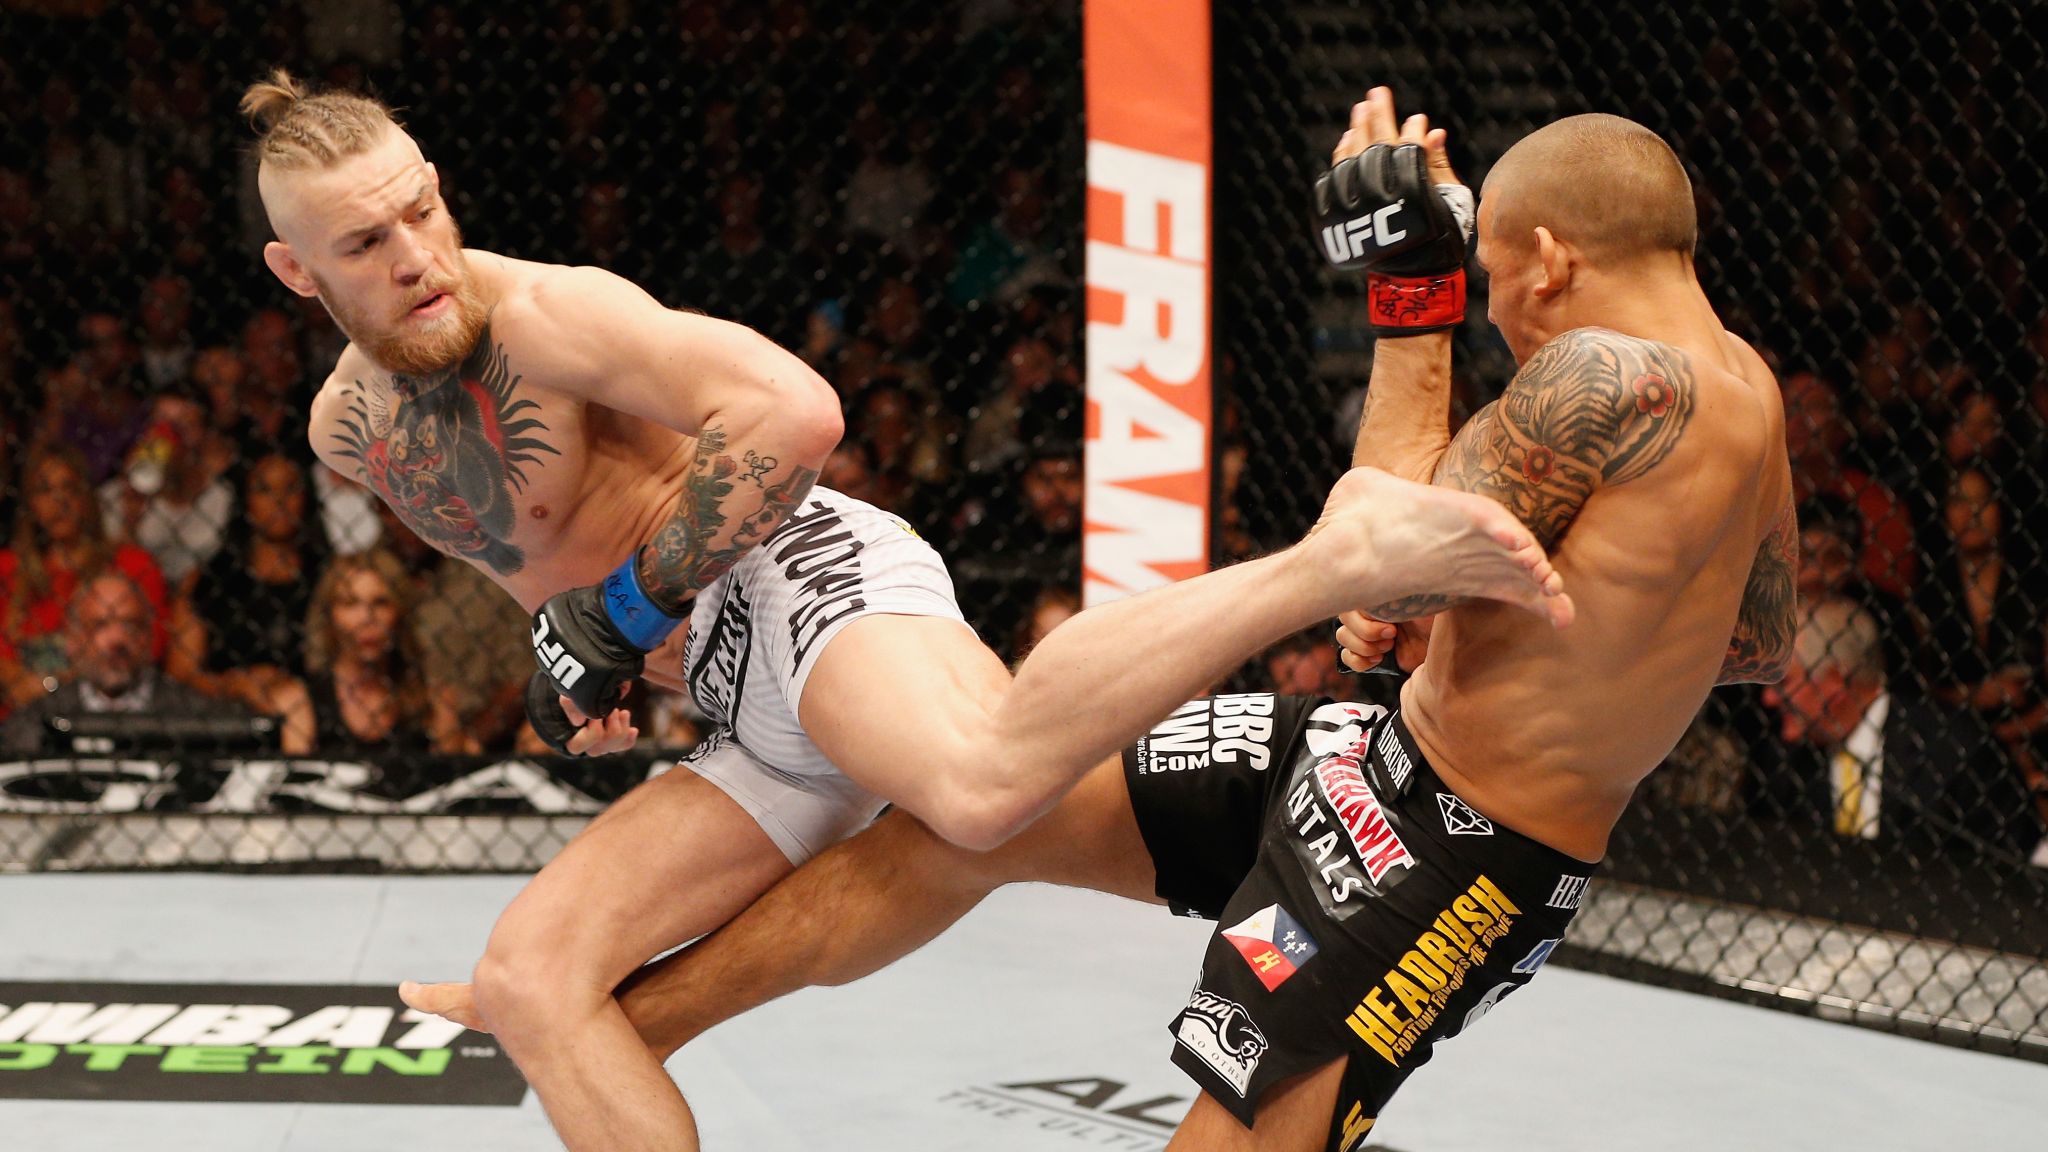 Conor McGregor is the 'real deal' admits UFC rival Dustin Poirier | MMA News | Sky Sports